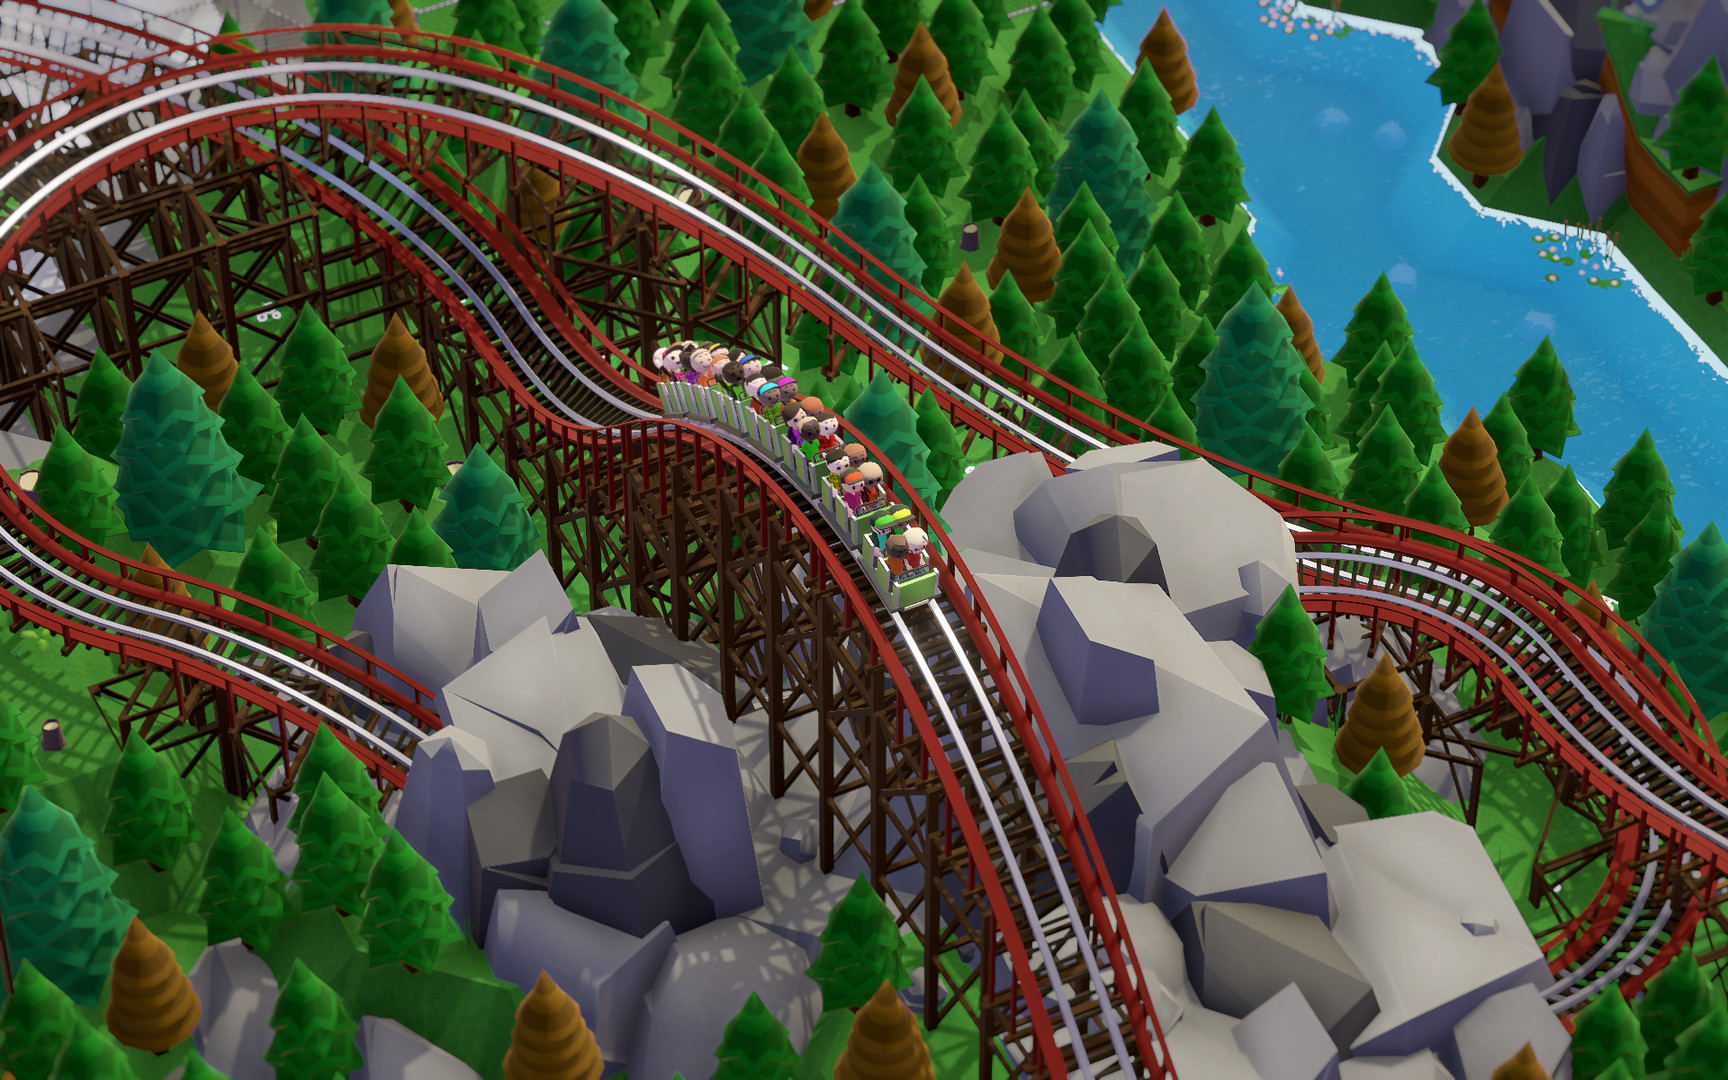 rollercoaster tycoon world free download easy no cracks